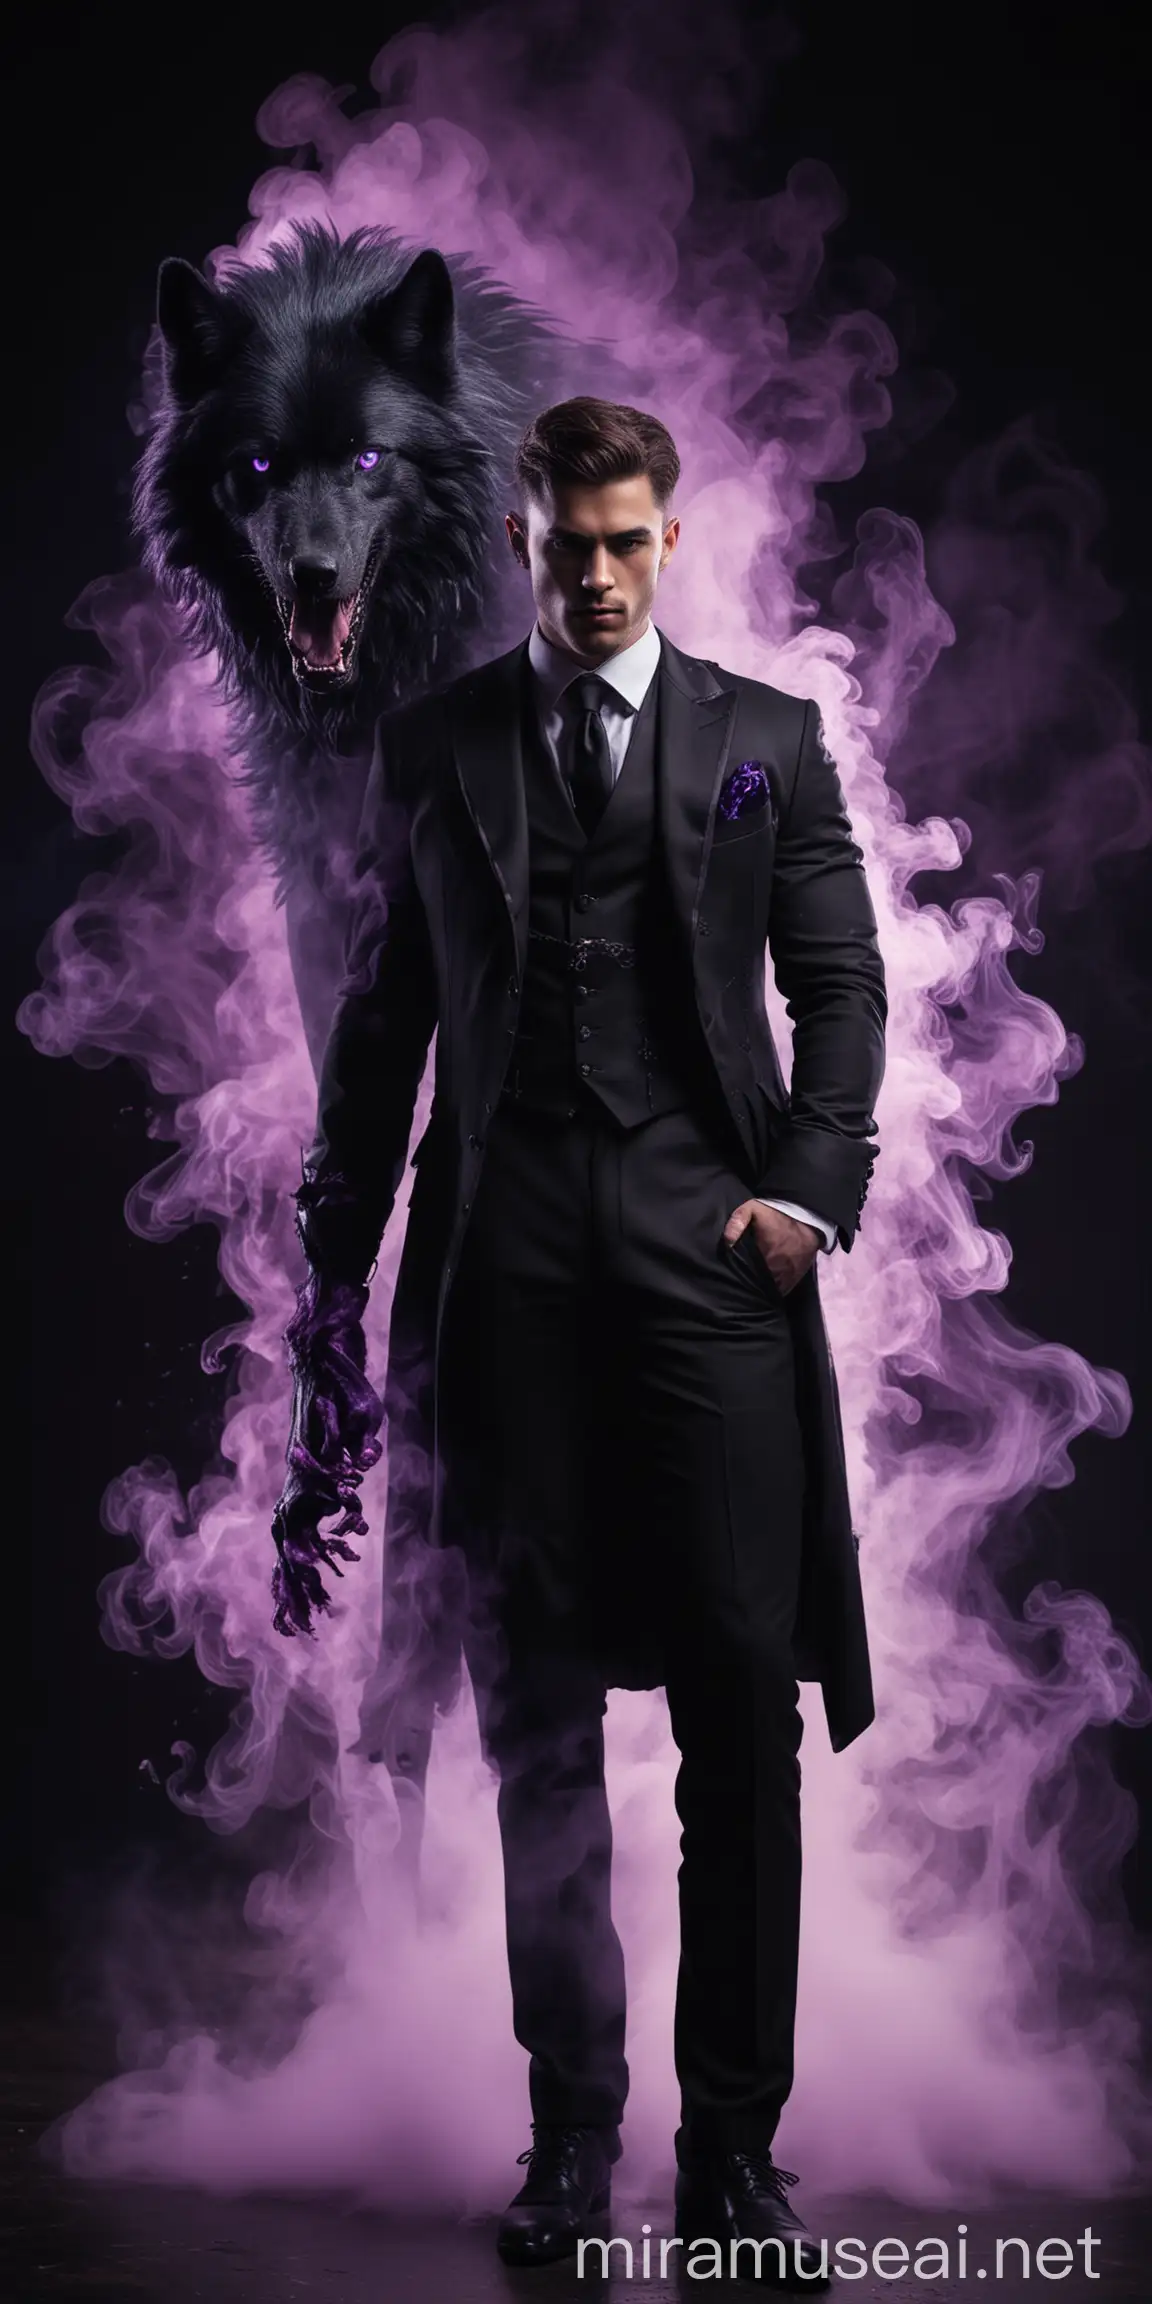 Mysterious Man in Royal Suit with Luminous Purple Smoke and Wolf Companion